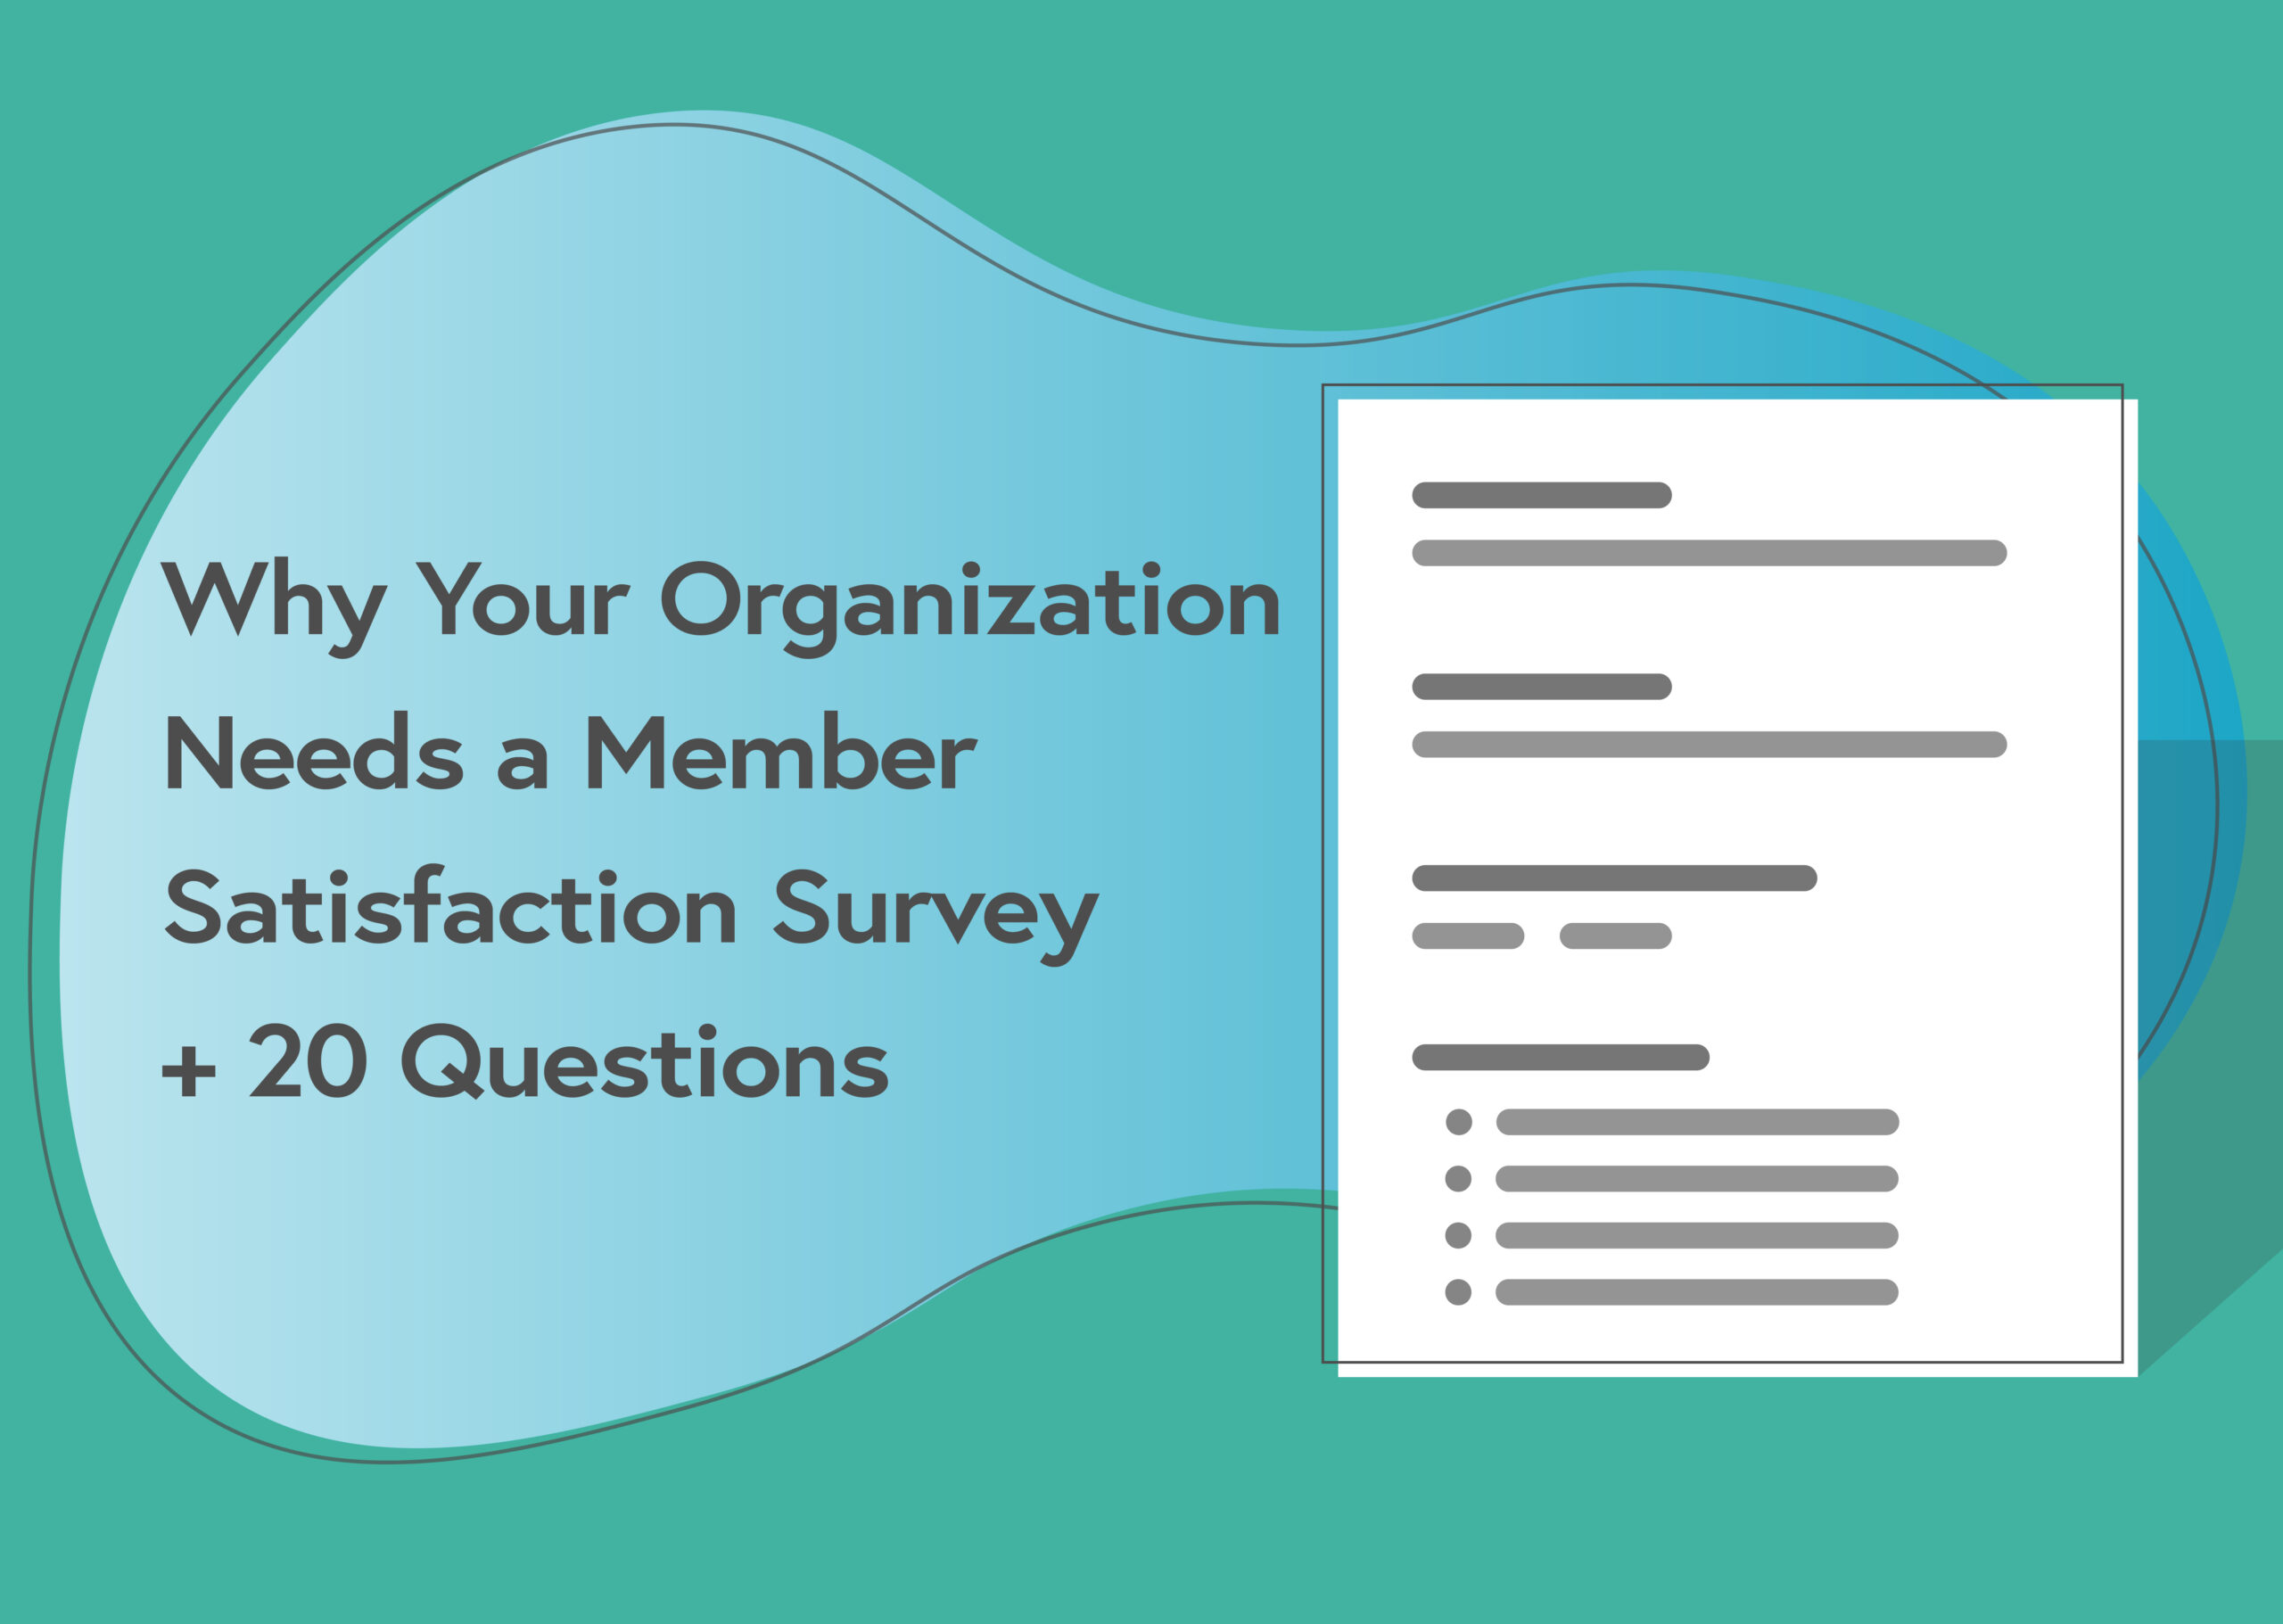 Why Your Organization Needs a Member Satisfaction Survey + 20 Questions